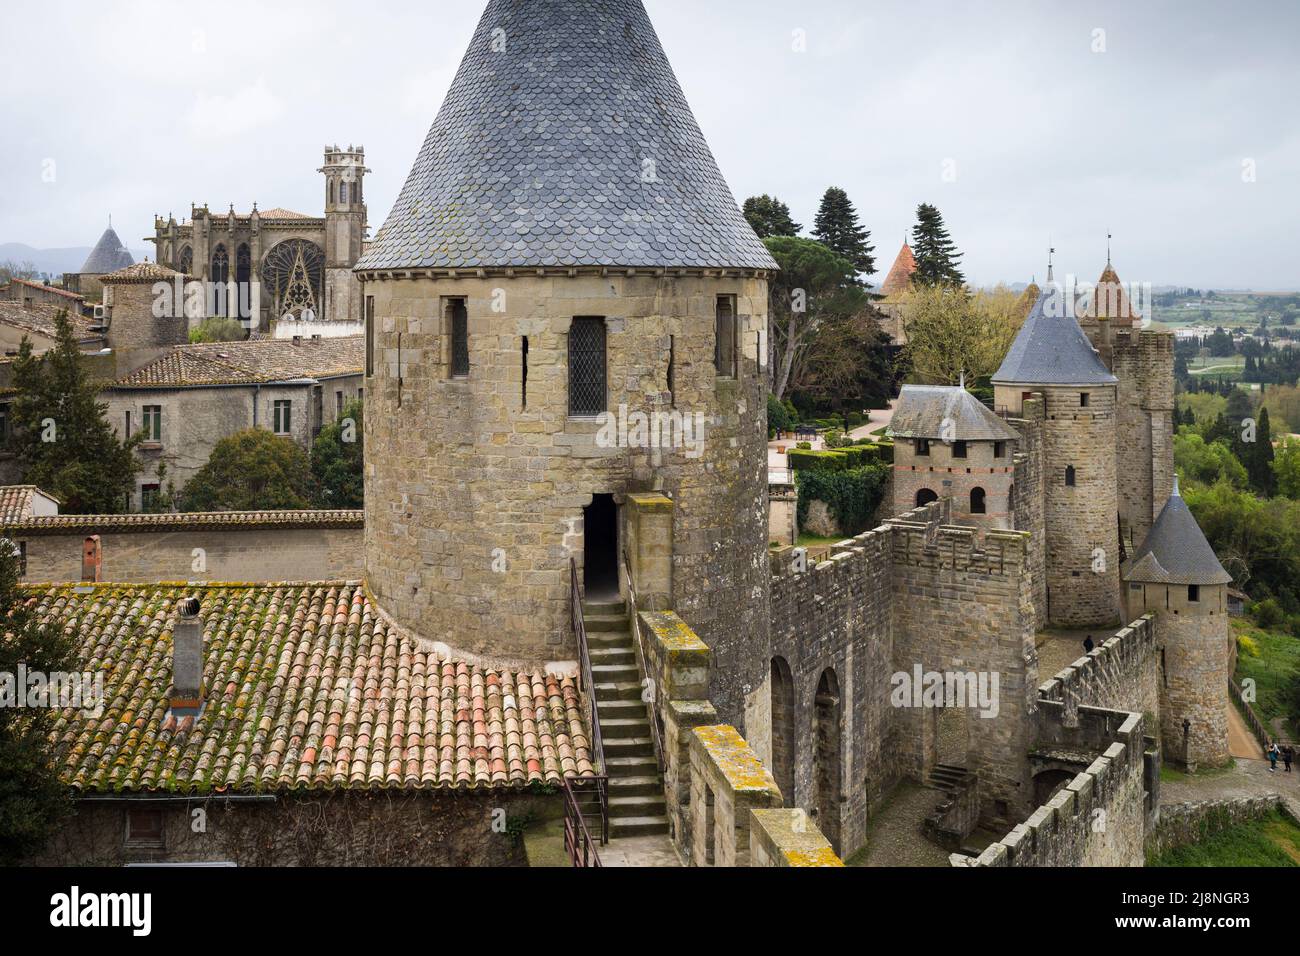 The Fortified Medieval Town of Carcassonne, Aude, France, restored by Viollet-le-Duc in the 19th Century, with the Basilica Church, Saint-Nazaire. Stock Photo